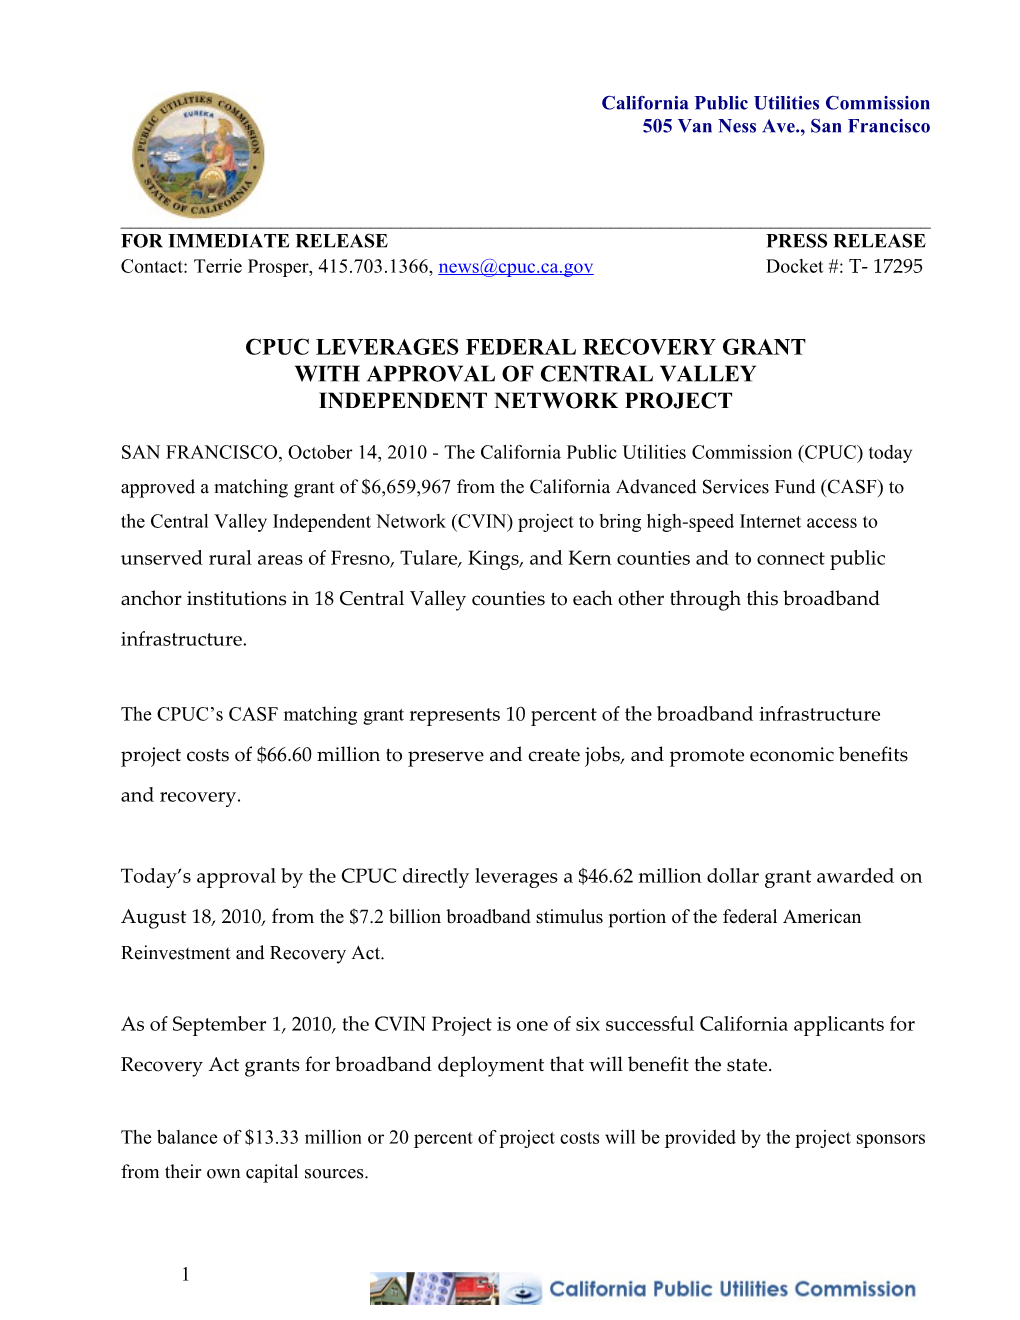 Cpuc Leverages Federal Recovery Grant with Approval of Central Valley Independent Network